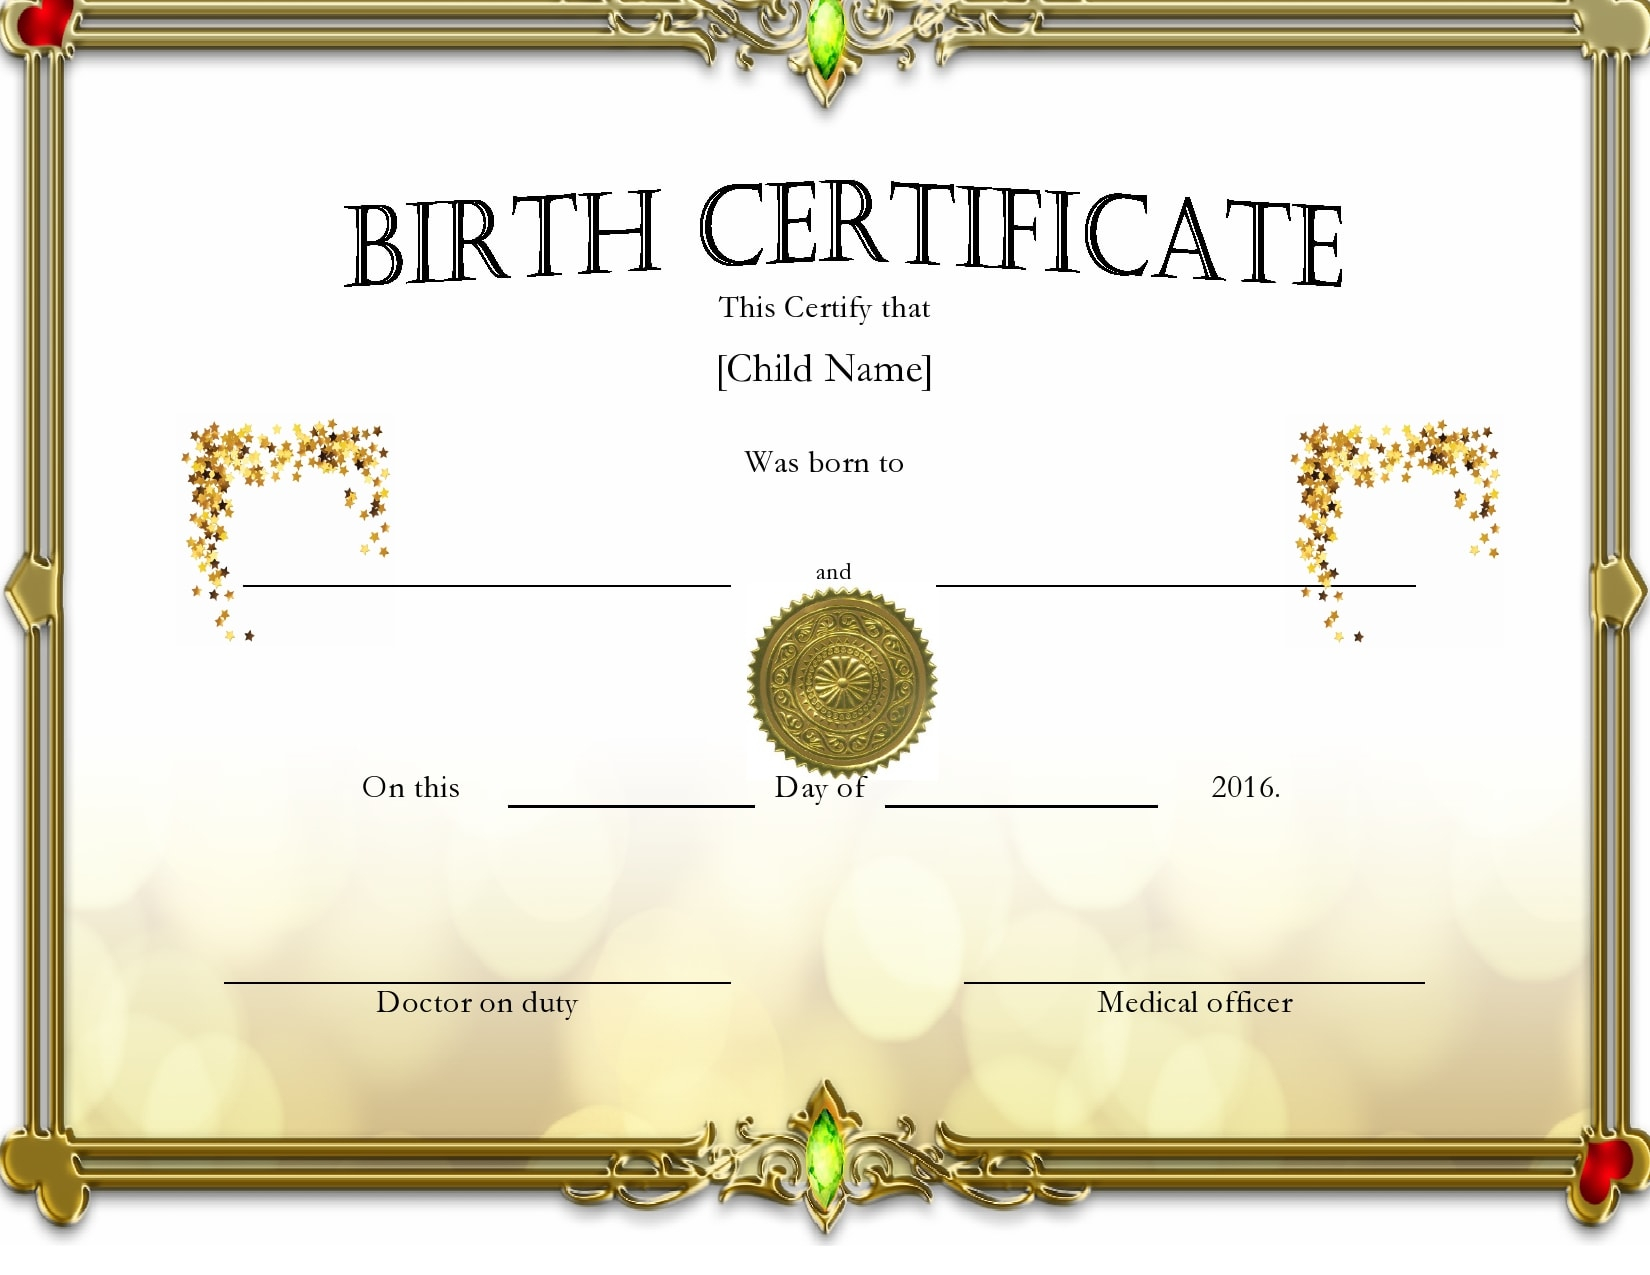 10 Blank Birth Certificate Templates (& Examples) - PrintableTemplates Throughout Editable Birth Certificate Template